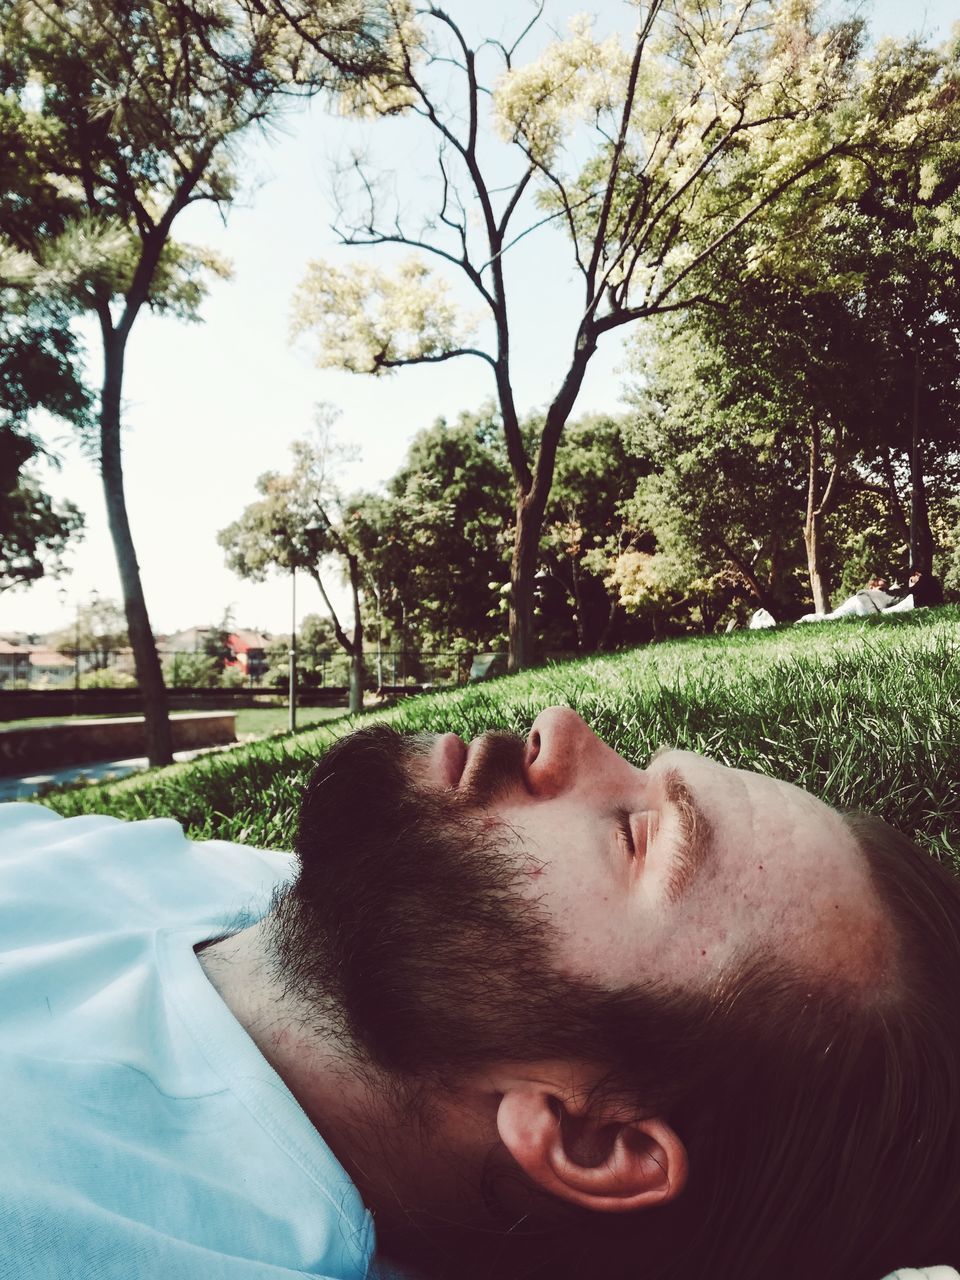 plant, one person, tree, nature, lying down, headshot, relaxation, leisure activity, men, adult, portrait, day, lifestyles, young adult, sunlight, eyes closed, lying on back, outdoors, person, human face, women, sky, resting, emotion, sleeping, spring, grass